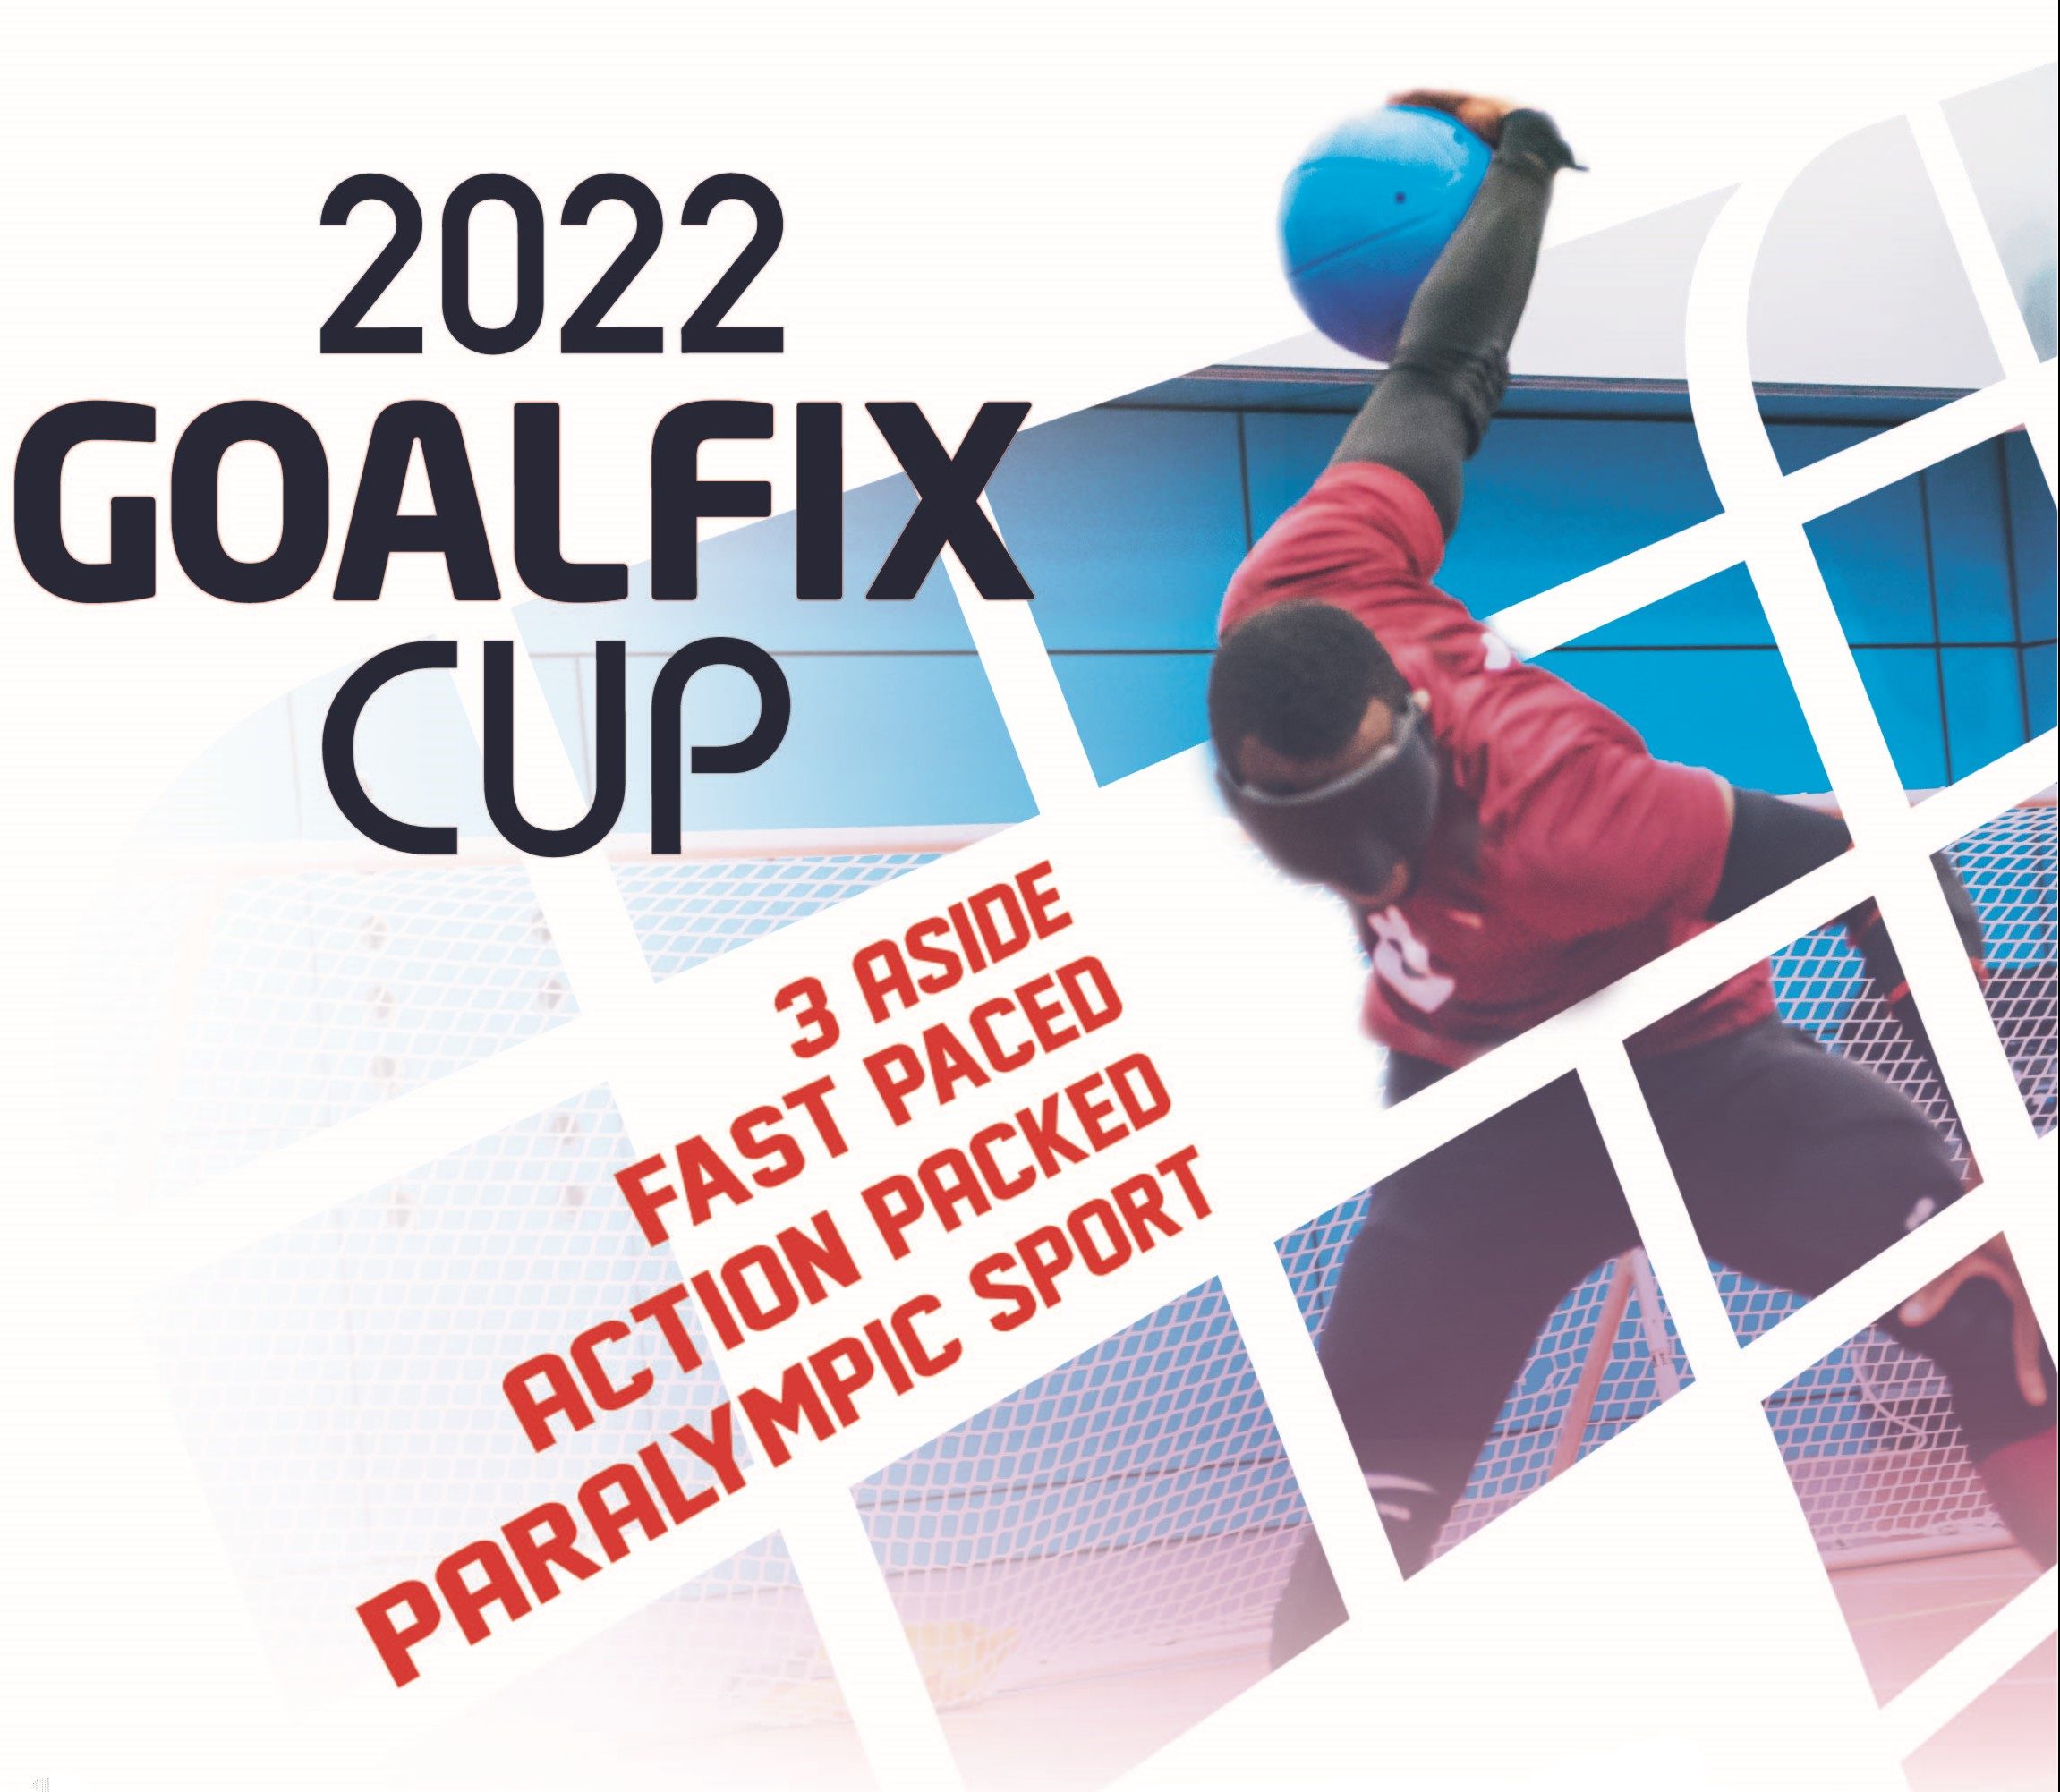 Goalfix cup poster - player in a red top throwing a ball.